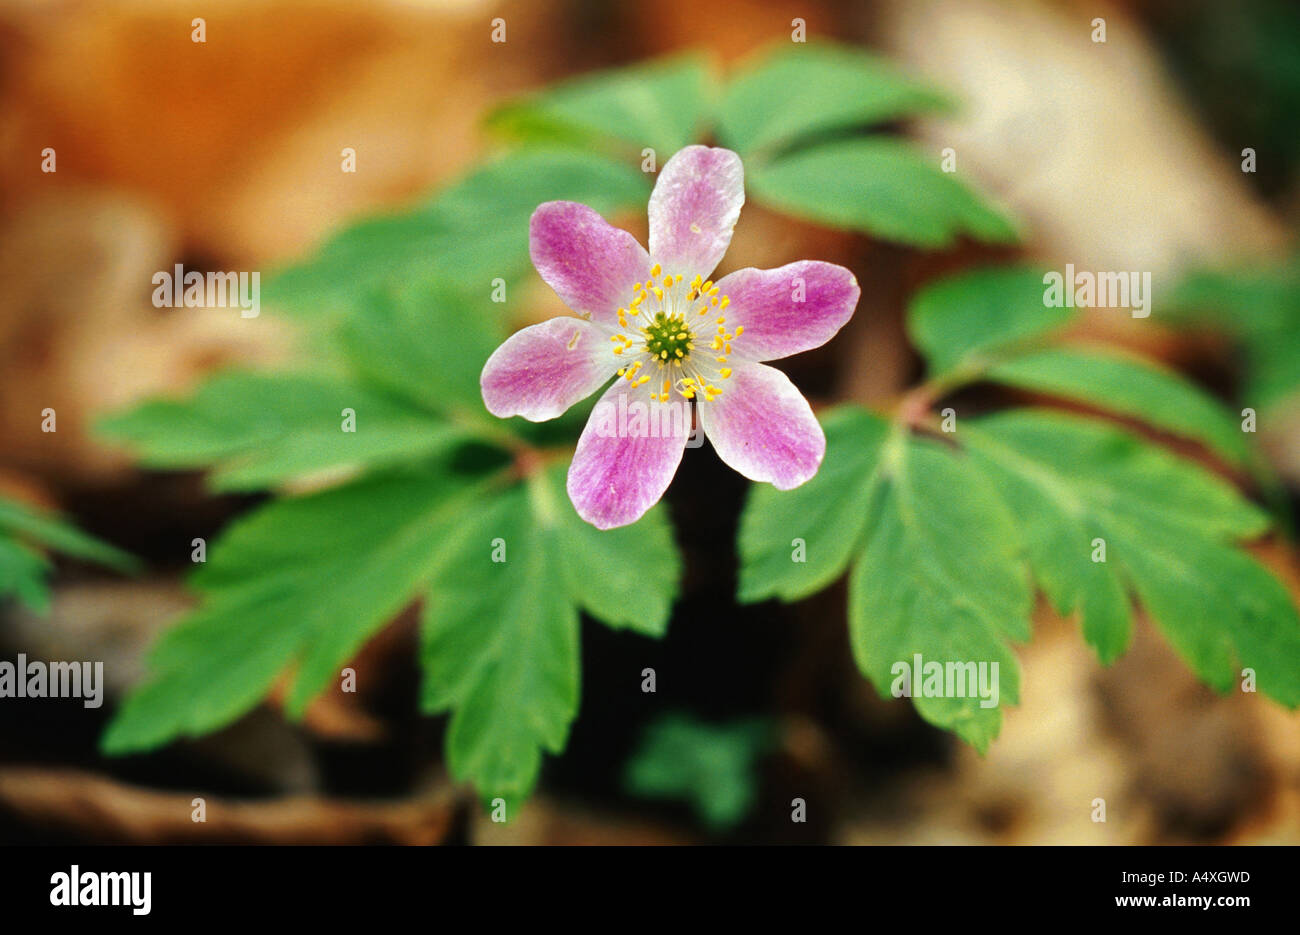 wood anemone (Anemone nemorosa), blooming, lilac blossom, Germany, Thueringen, NP Hainich Stock Photo